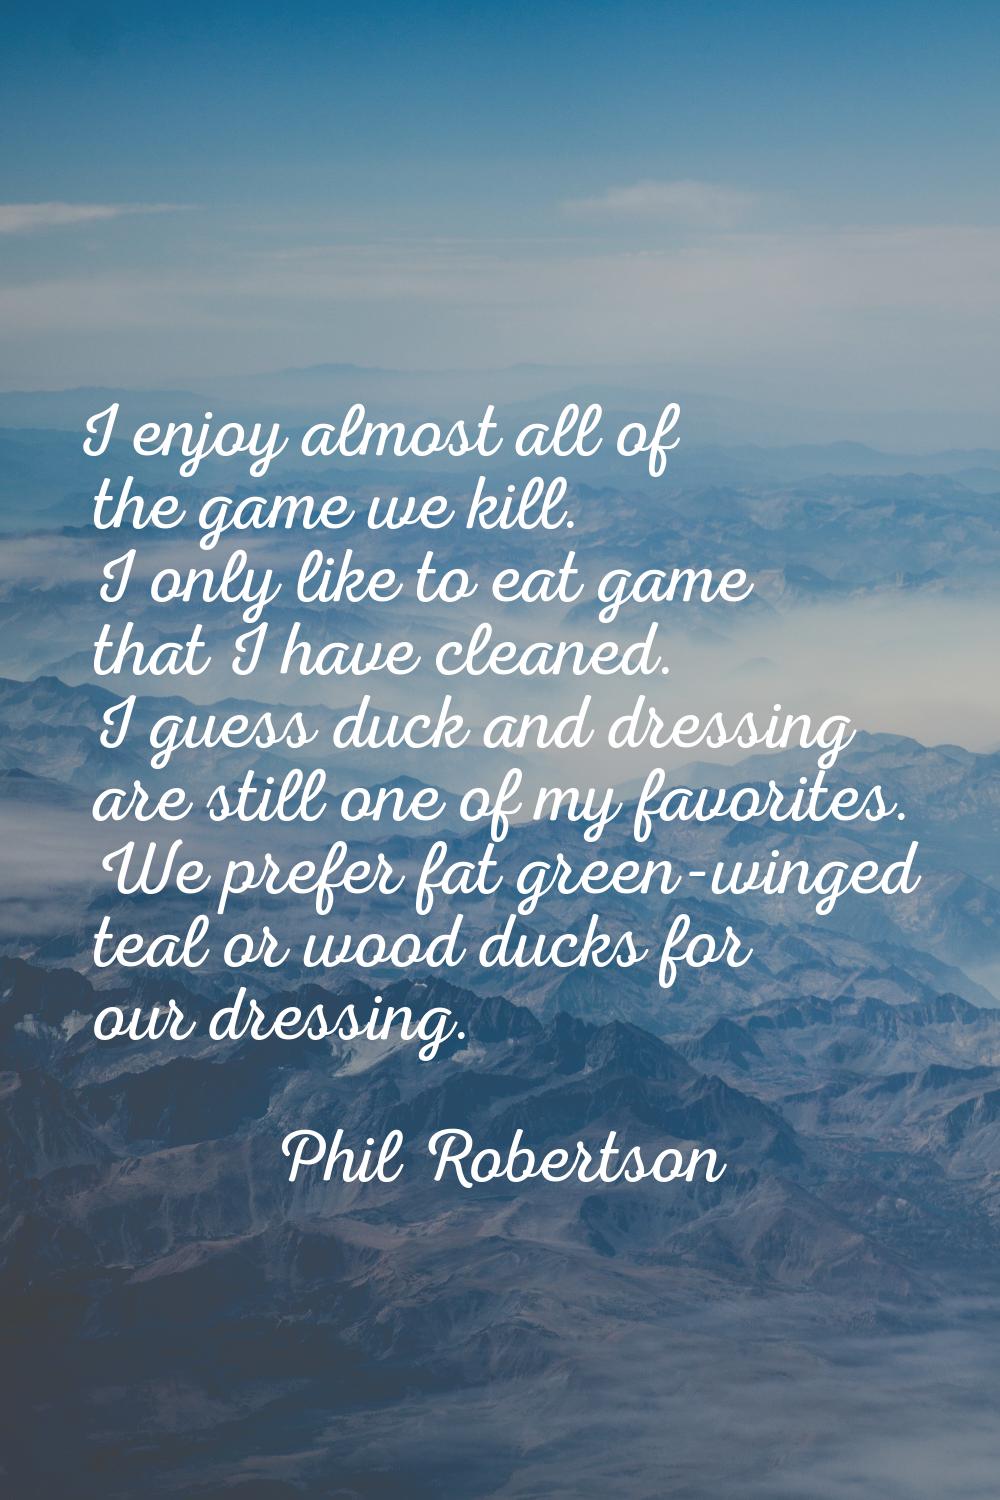 I enjoy almost all of the game we kill. I only like to eat game that I have cleaned. I guess duck a